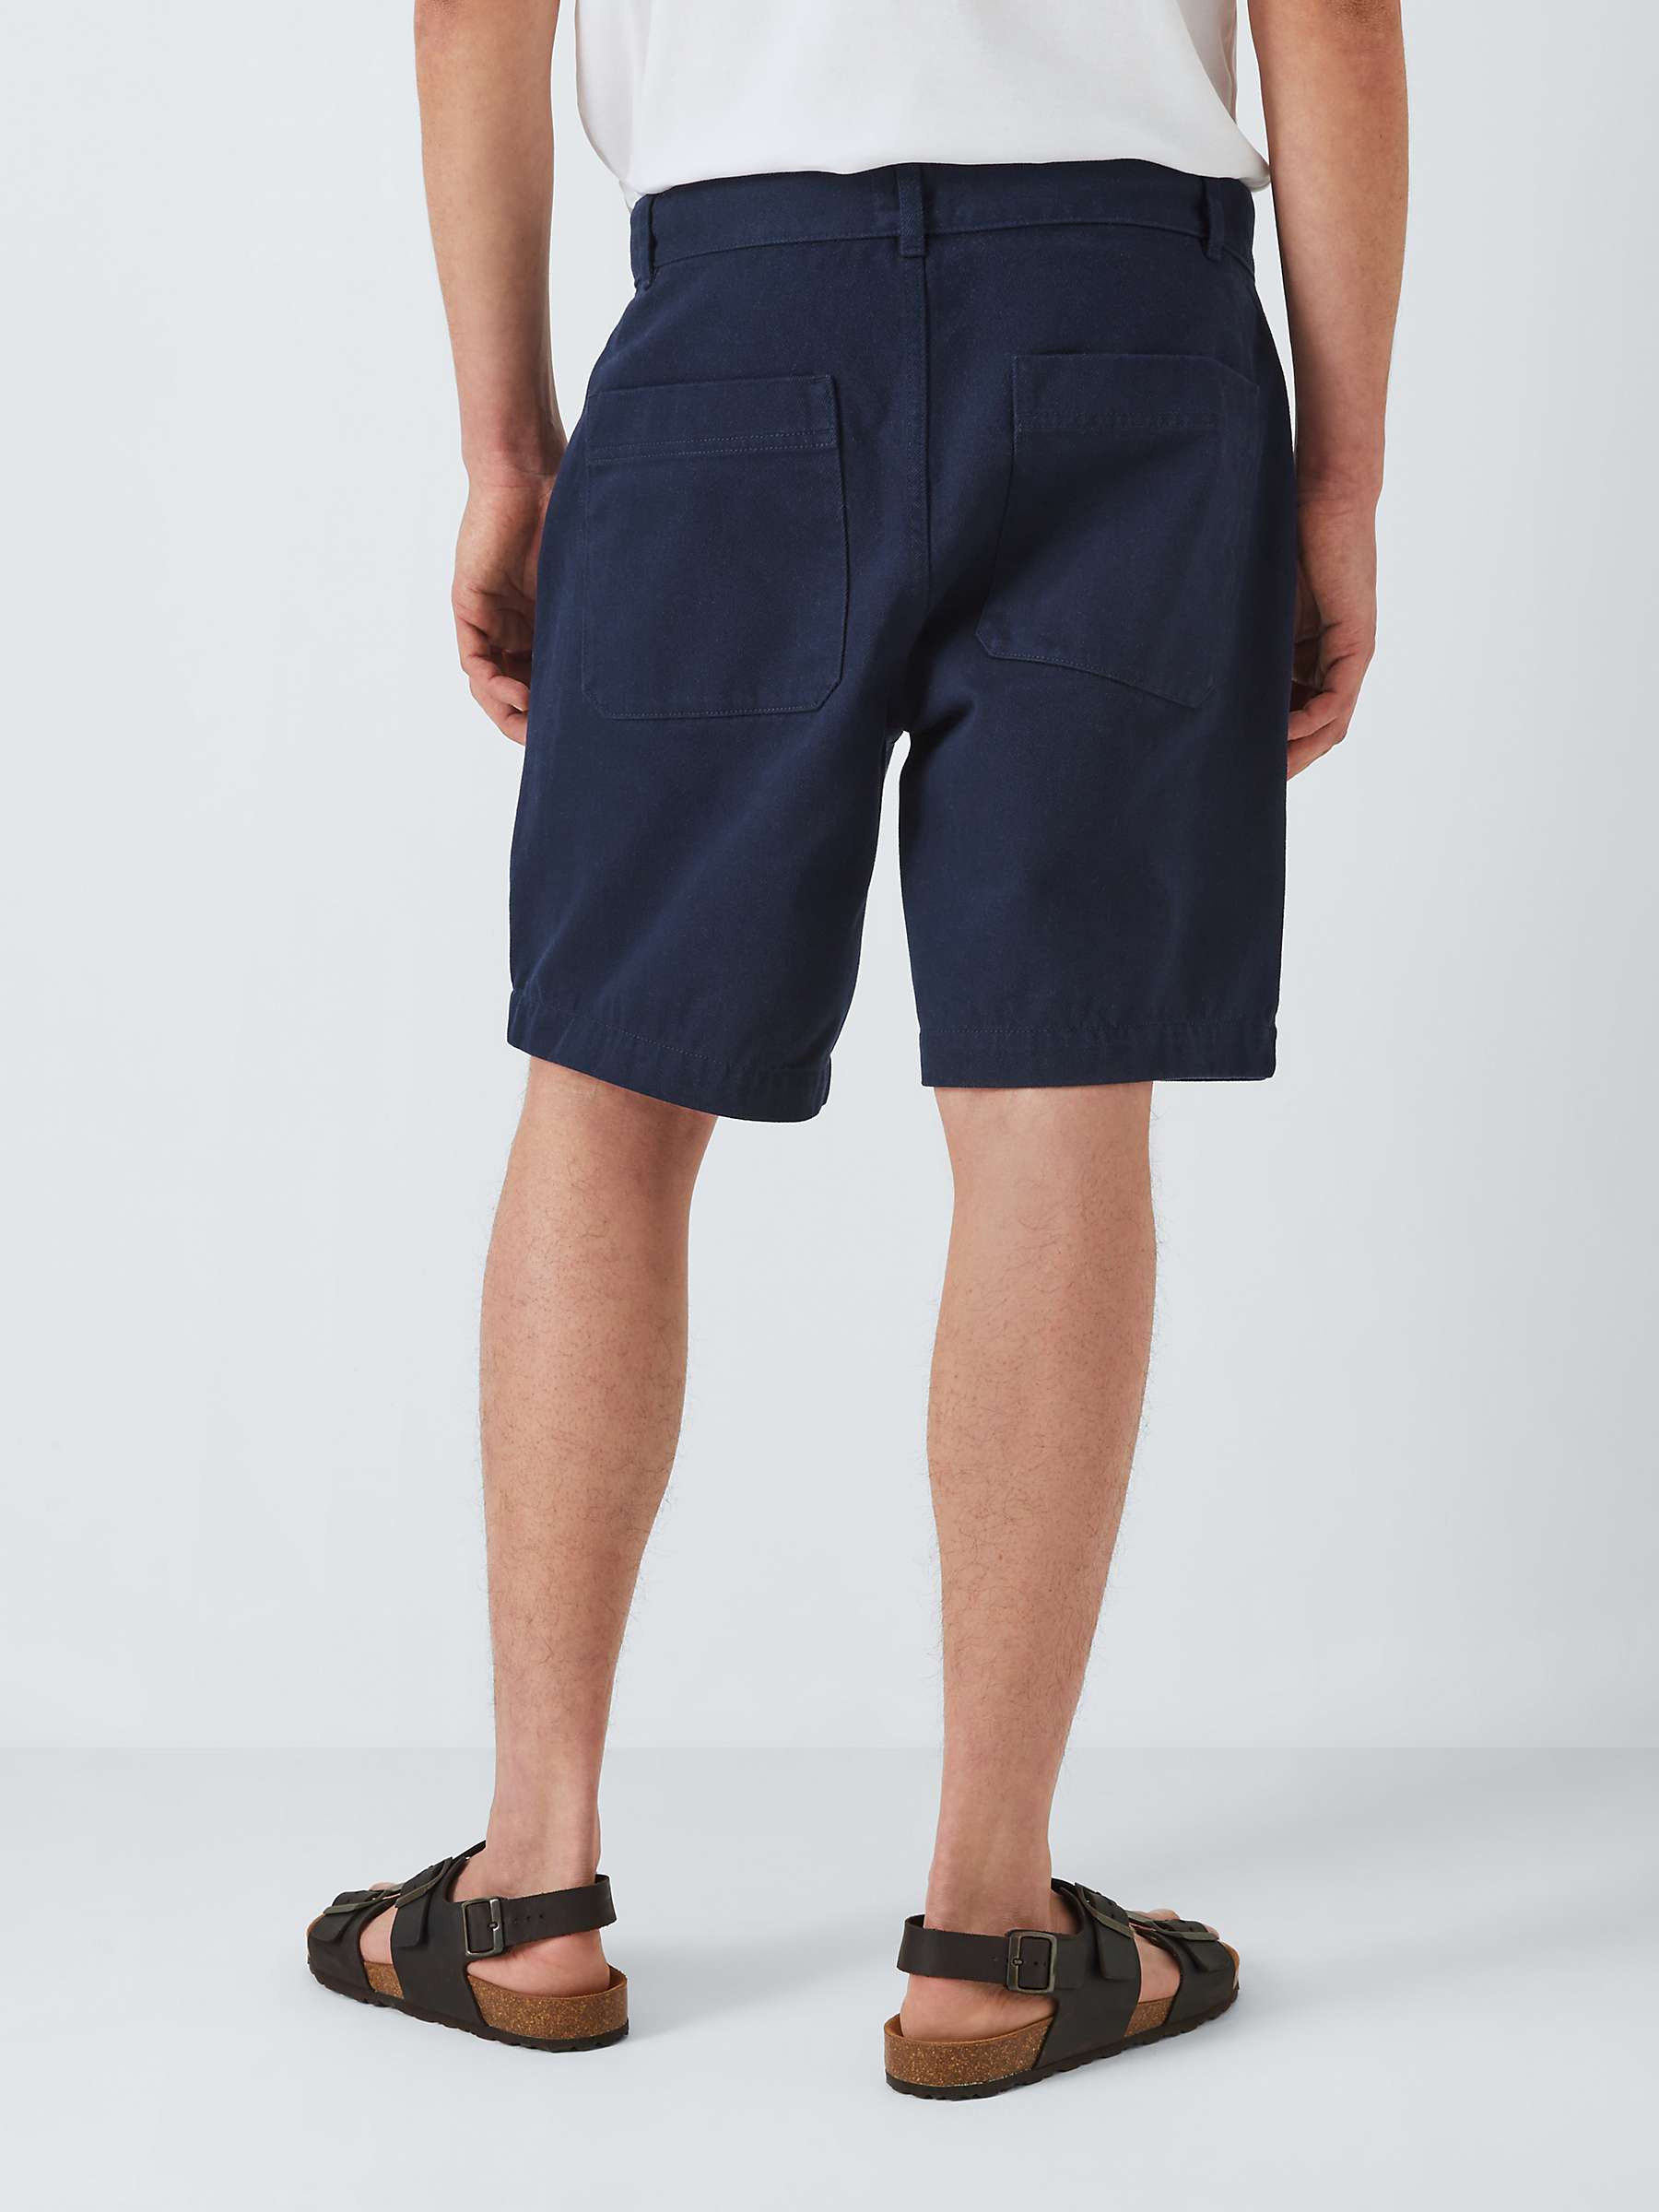 Buy John Lewis ANYDAY Double Knee Shorts Online at johnlewis.com